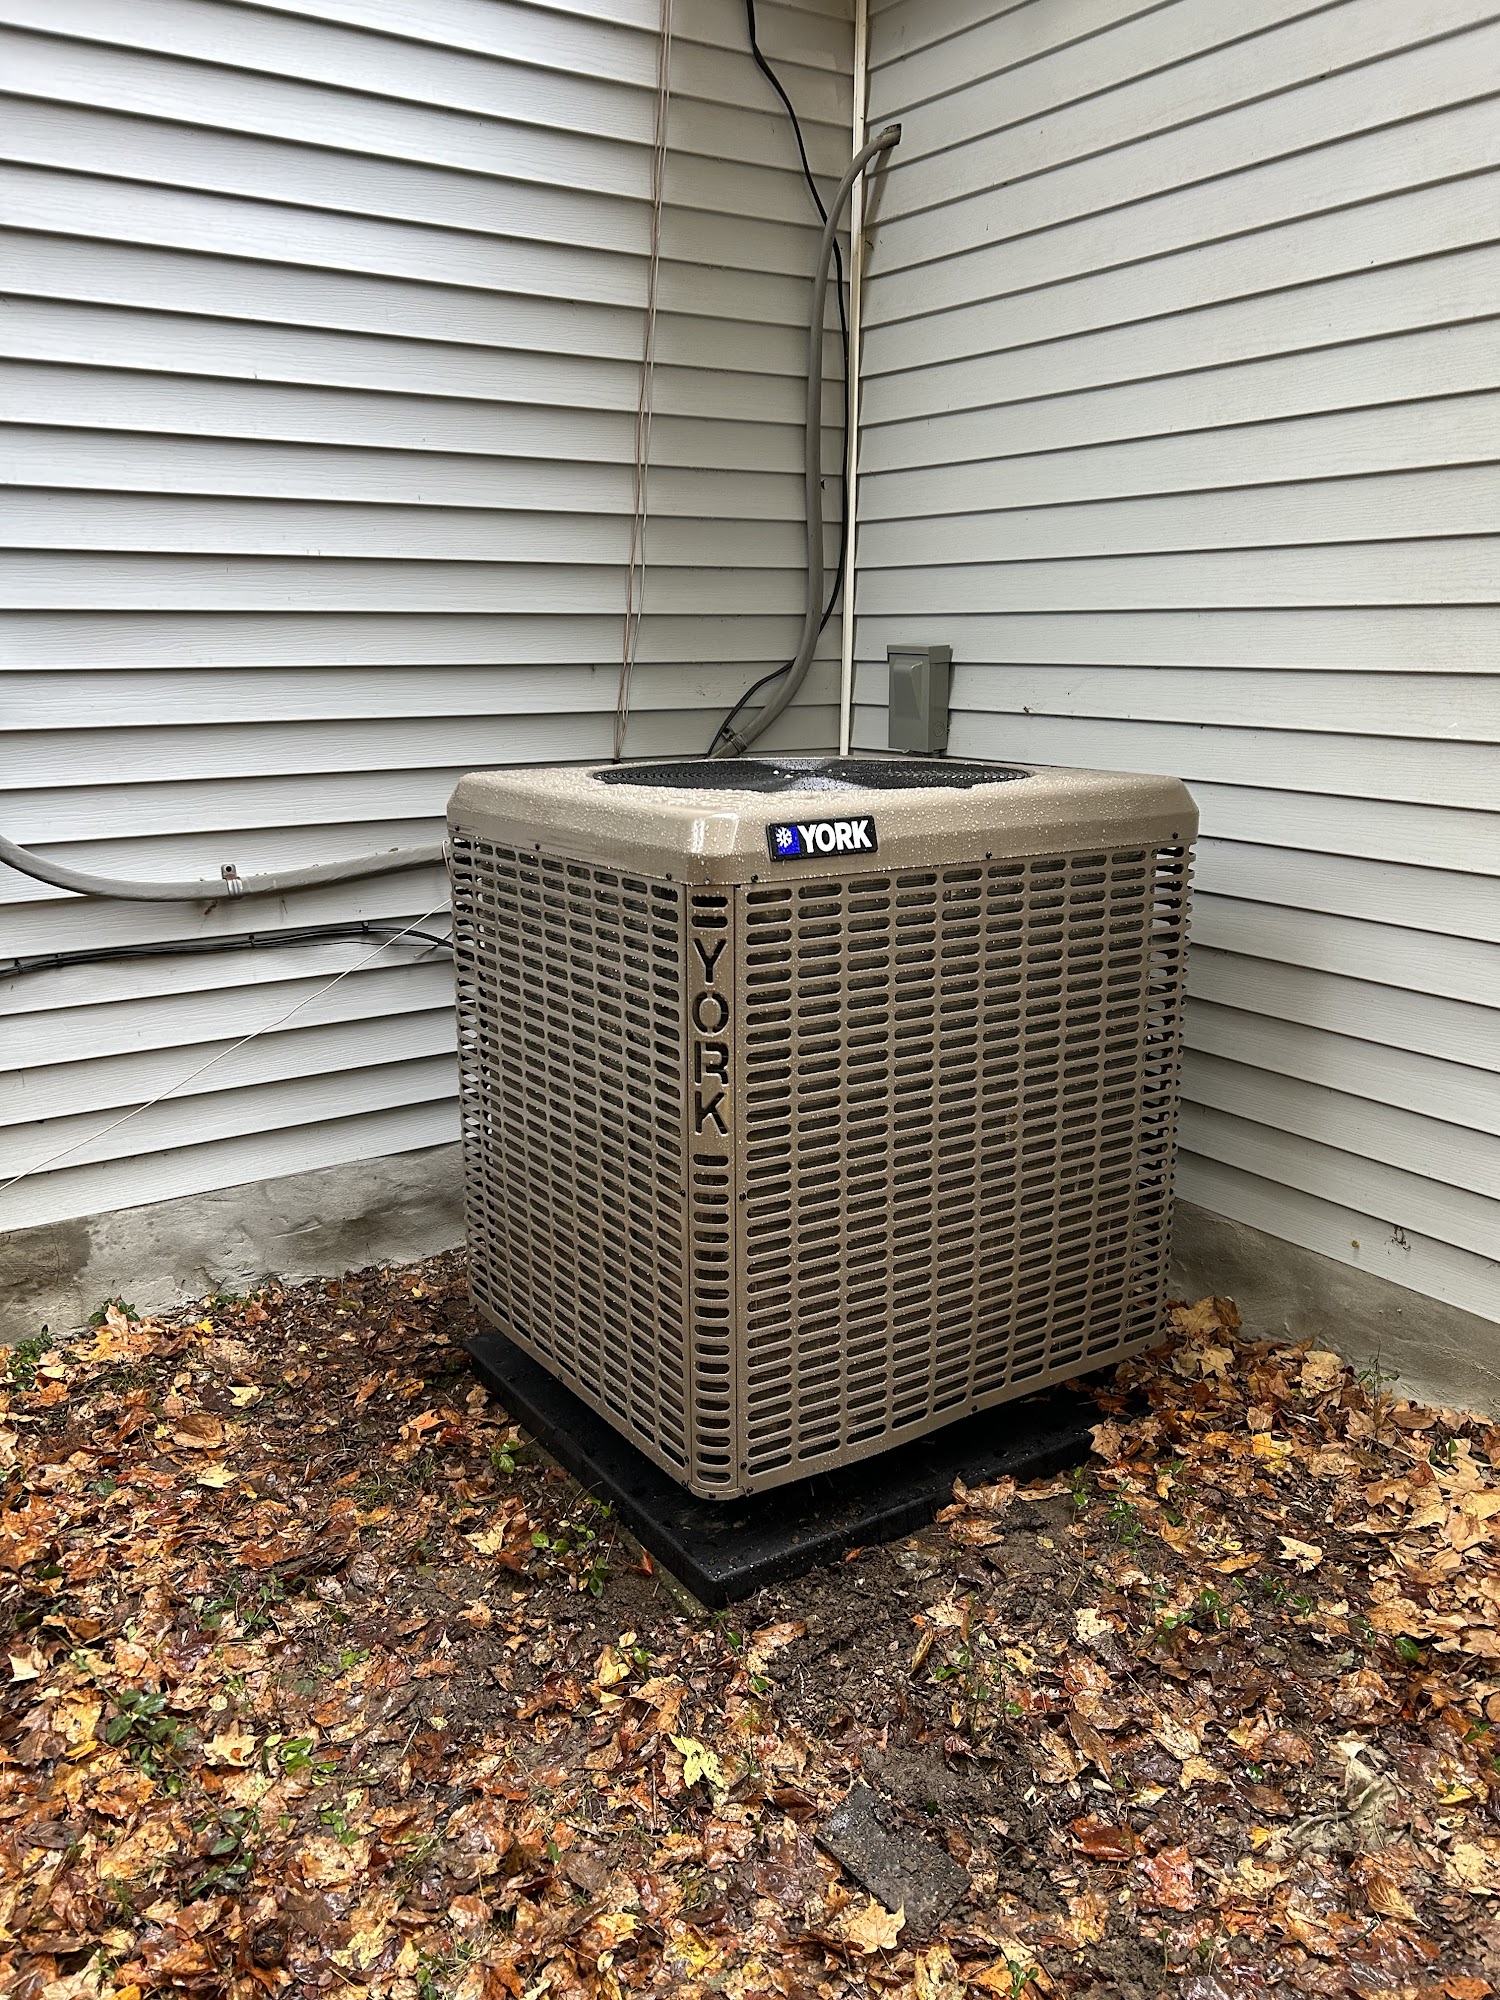 Fields Heating, Cooling & Home Services 8611 W Co Rd 850 S, Greensburg Indiana 47240